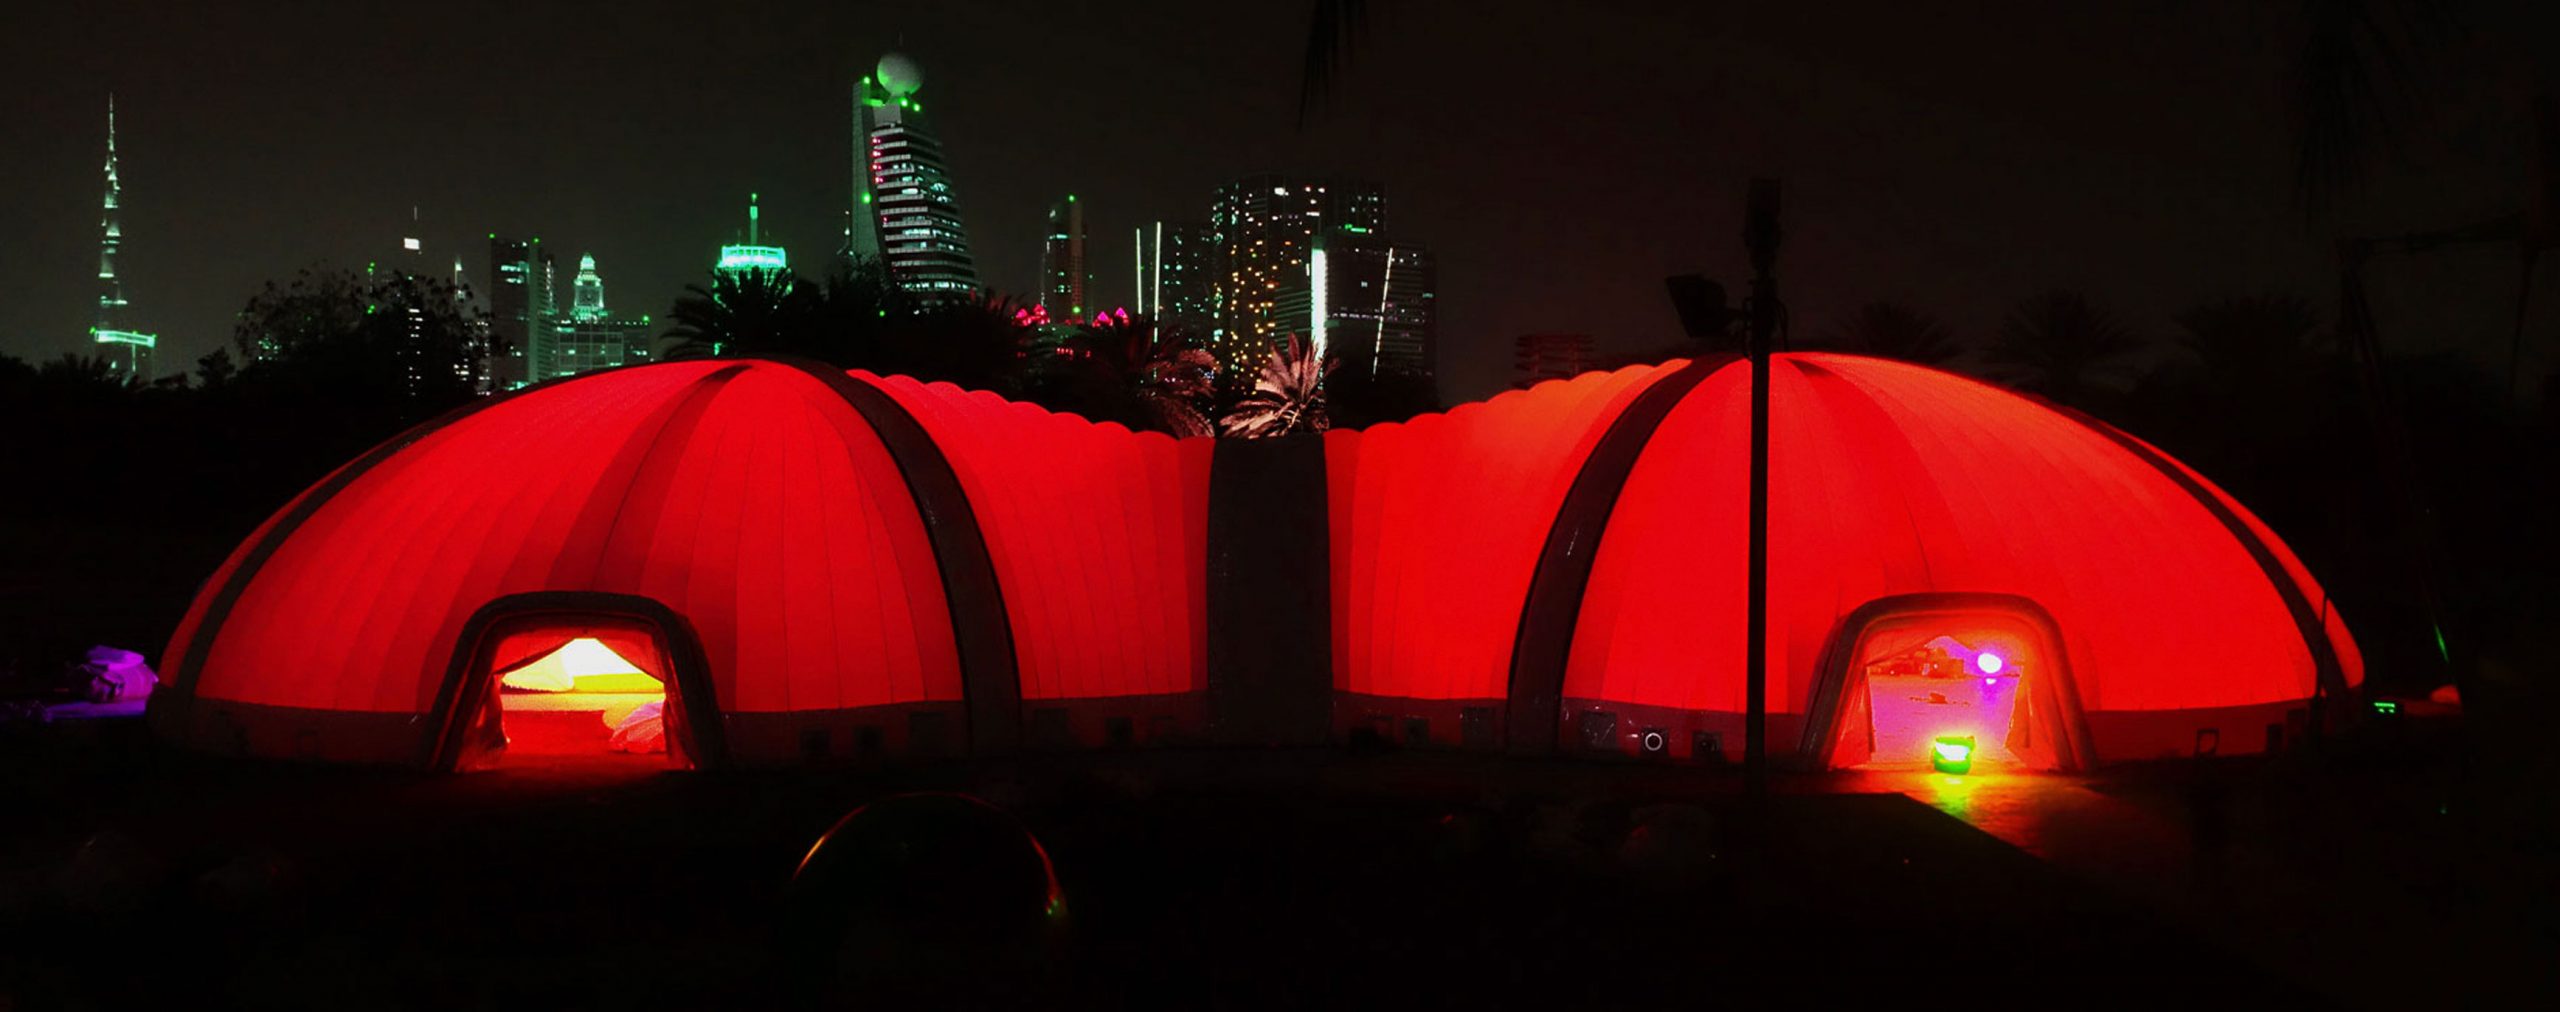 Pic showing a Created By Air peanut outdoor inflatable structure illuminated with red LED lighting at night